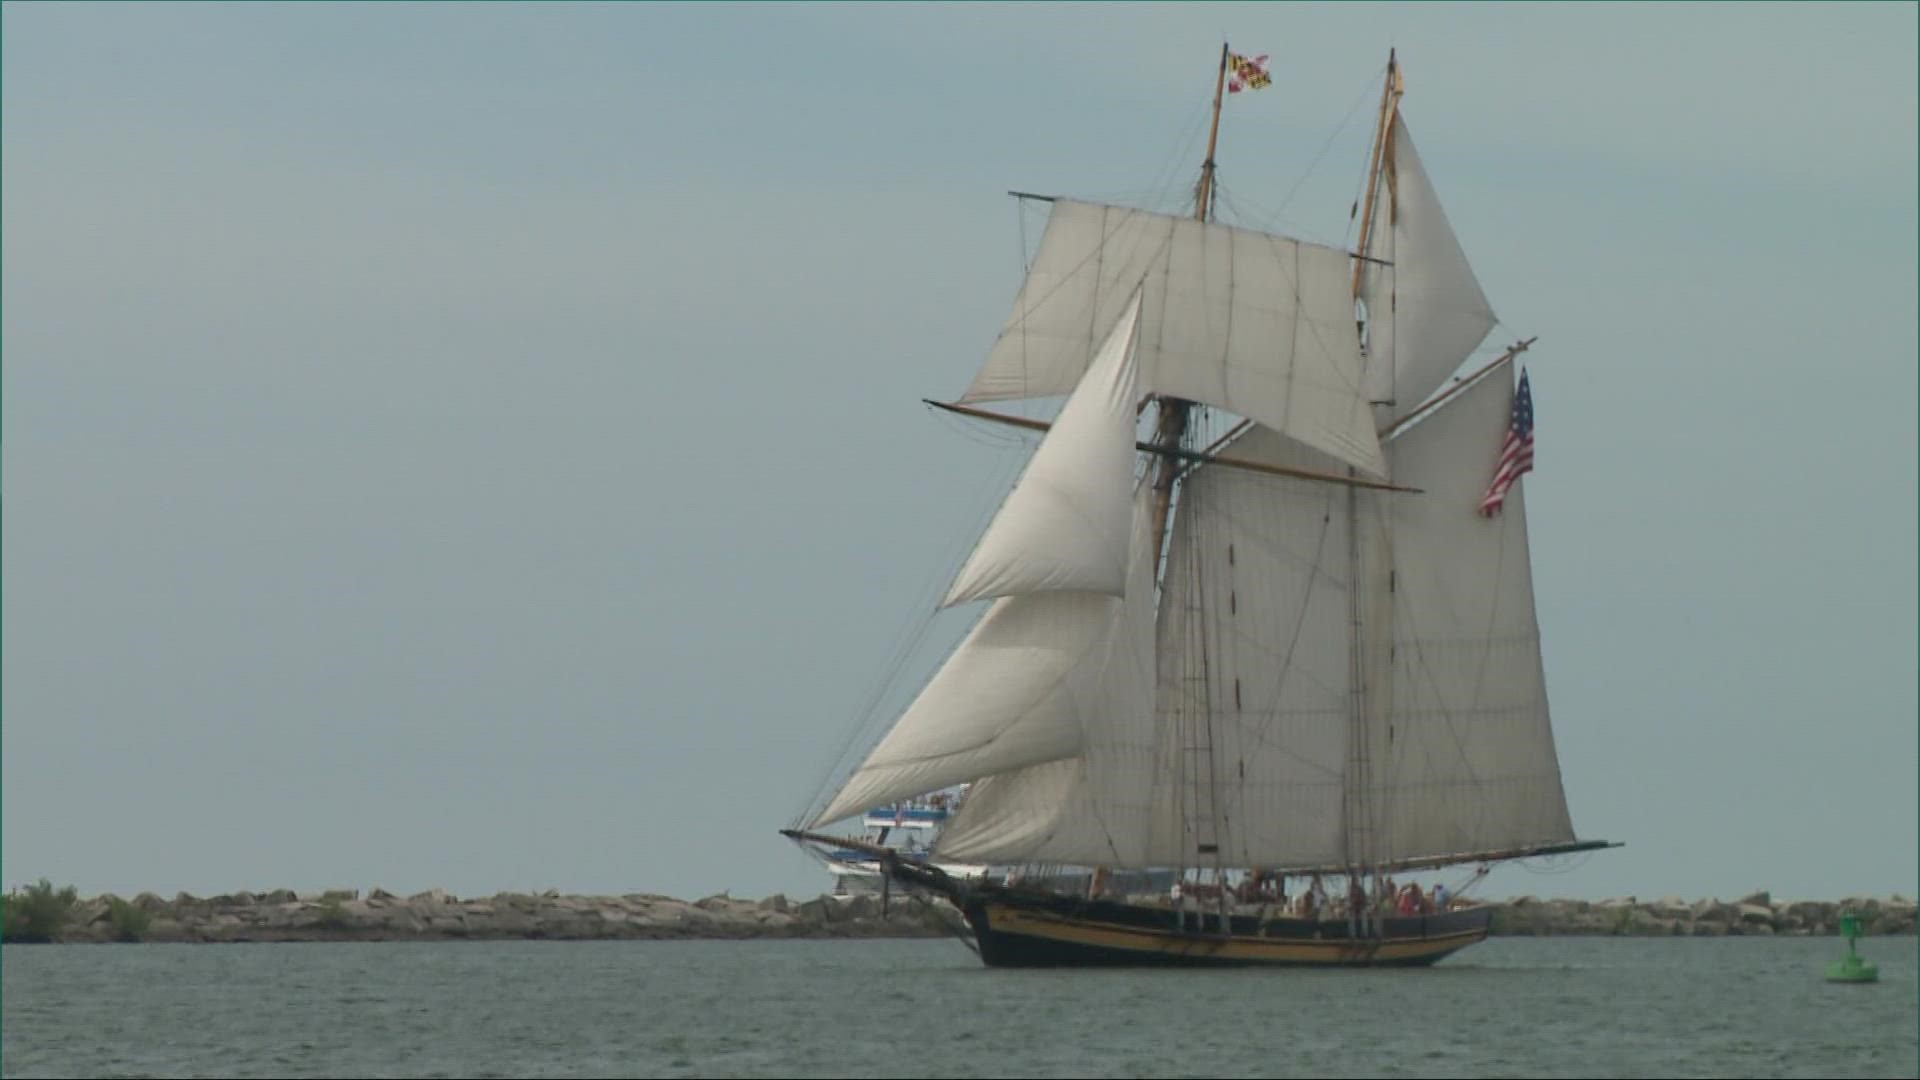 The Tall Ships Festival brings vessels large and small to the Port of Cleveland.